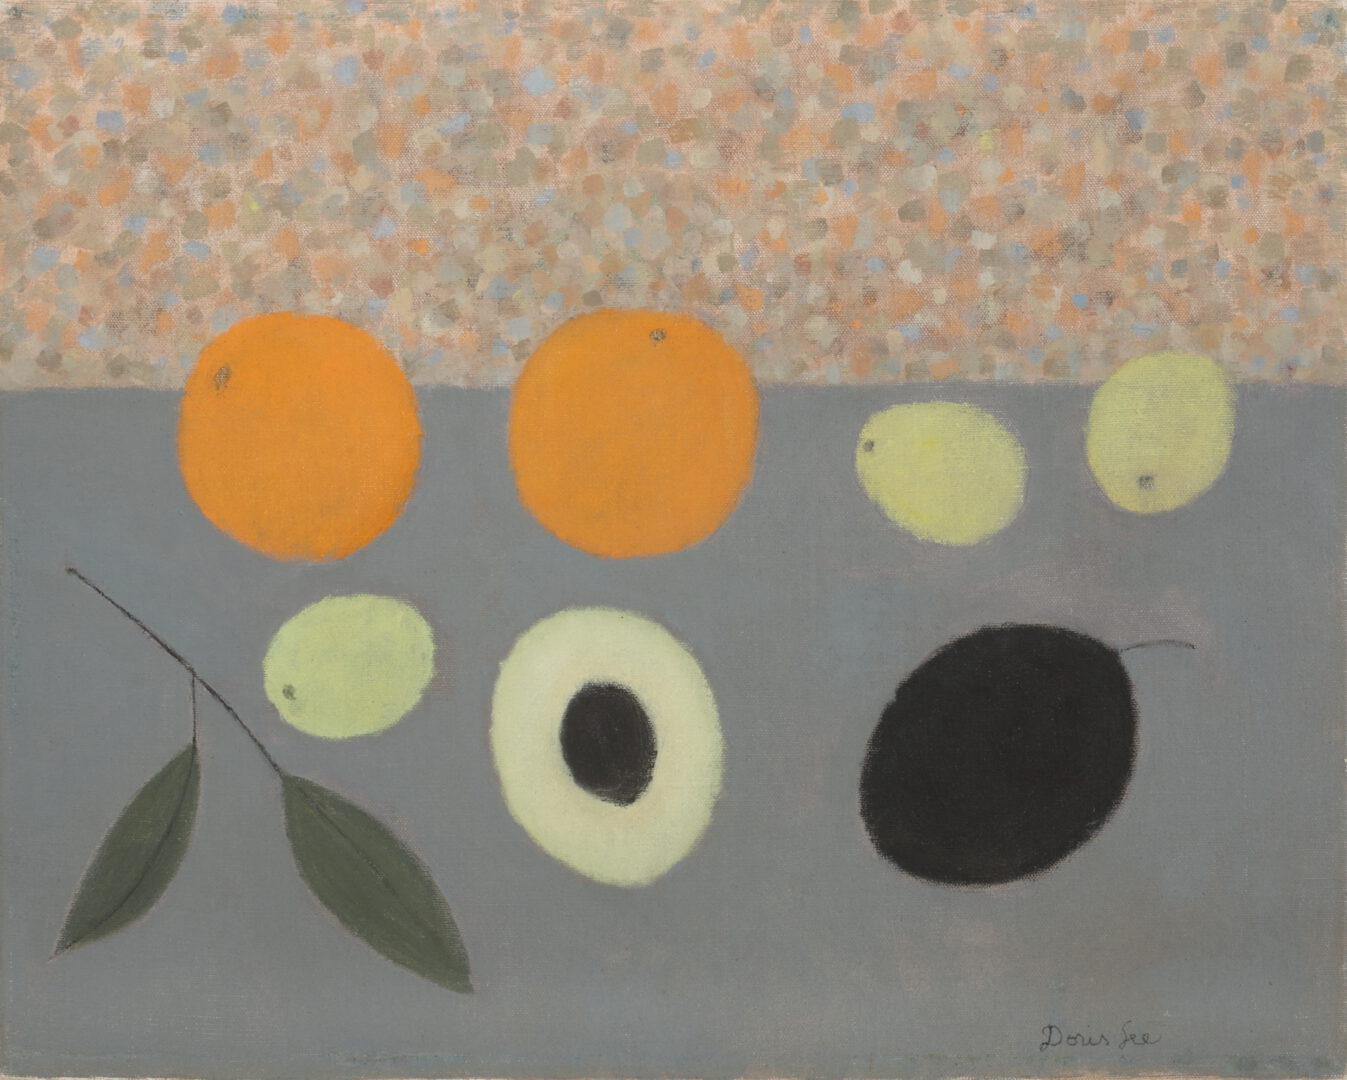 Doris Lee (1904 – 1983), Oranges and Avocados, 1945, Oil on canva